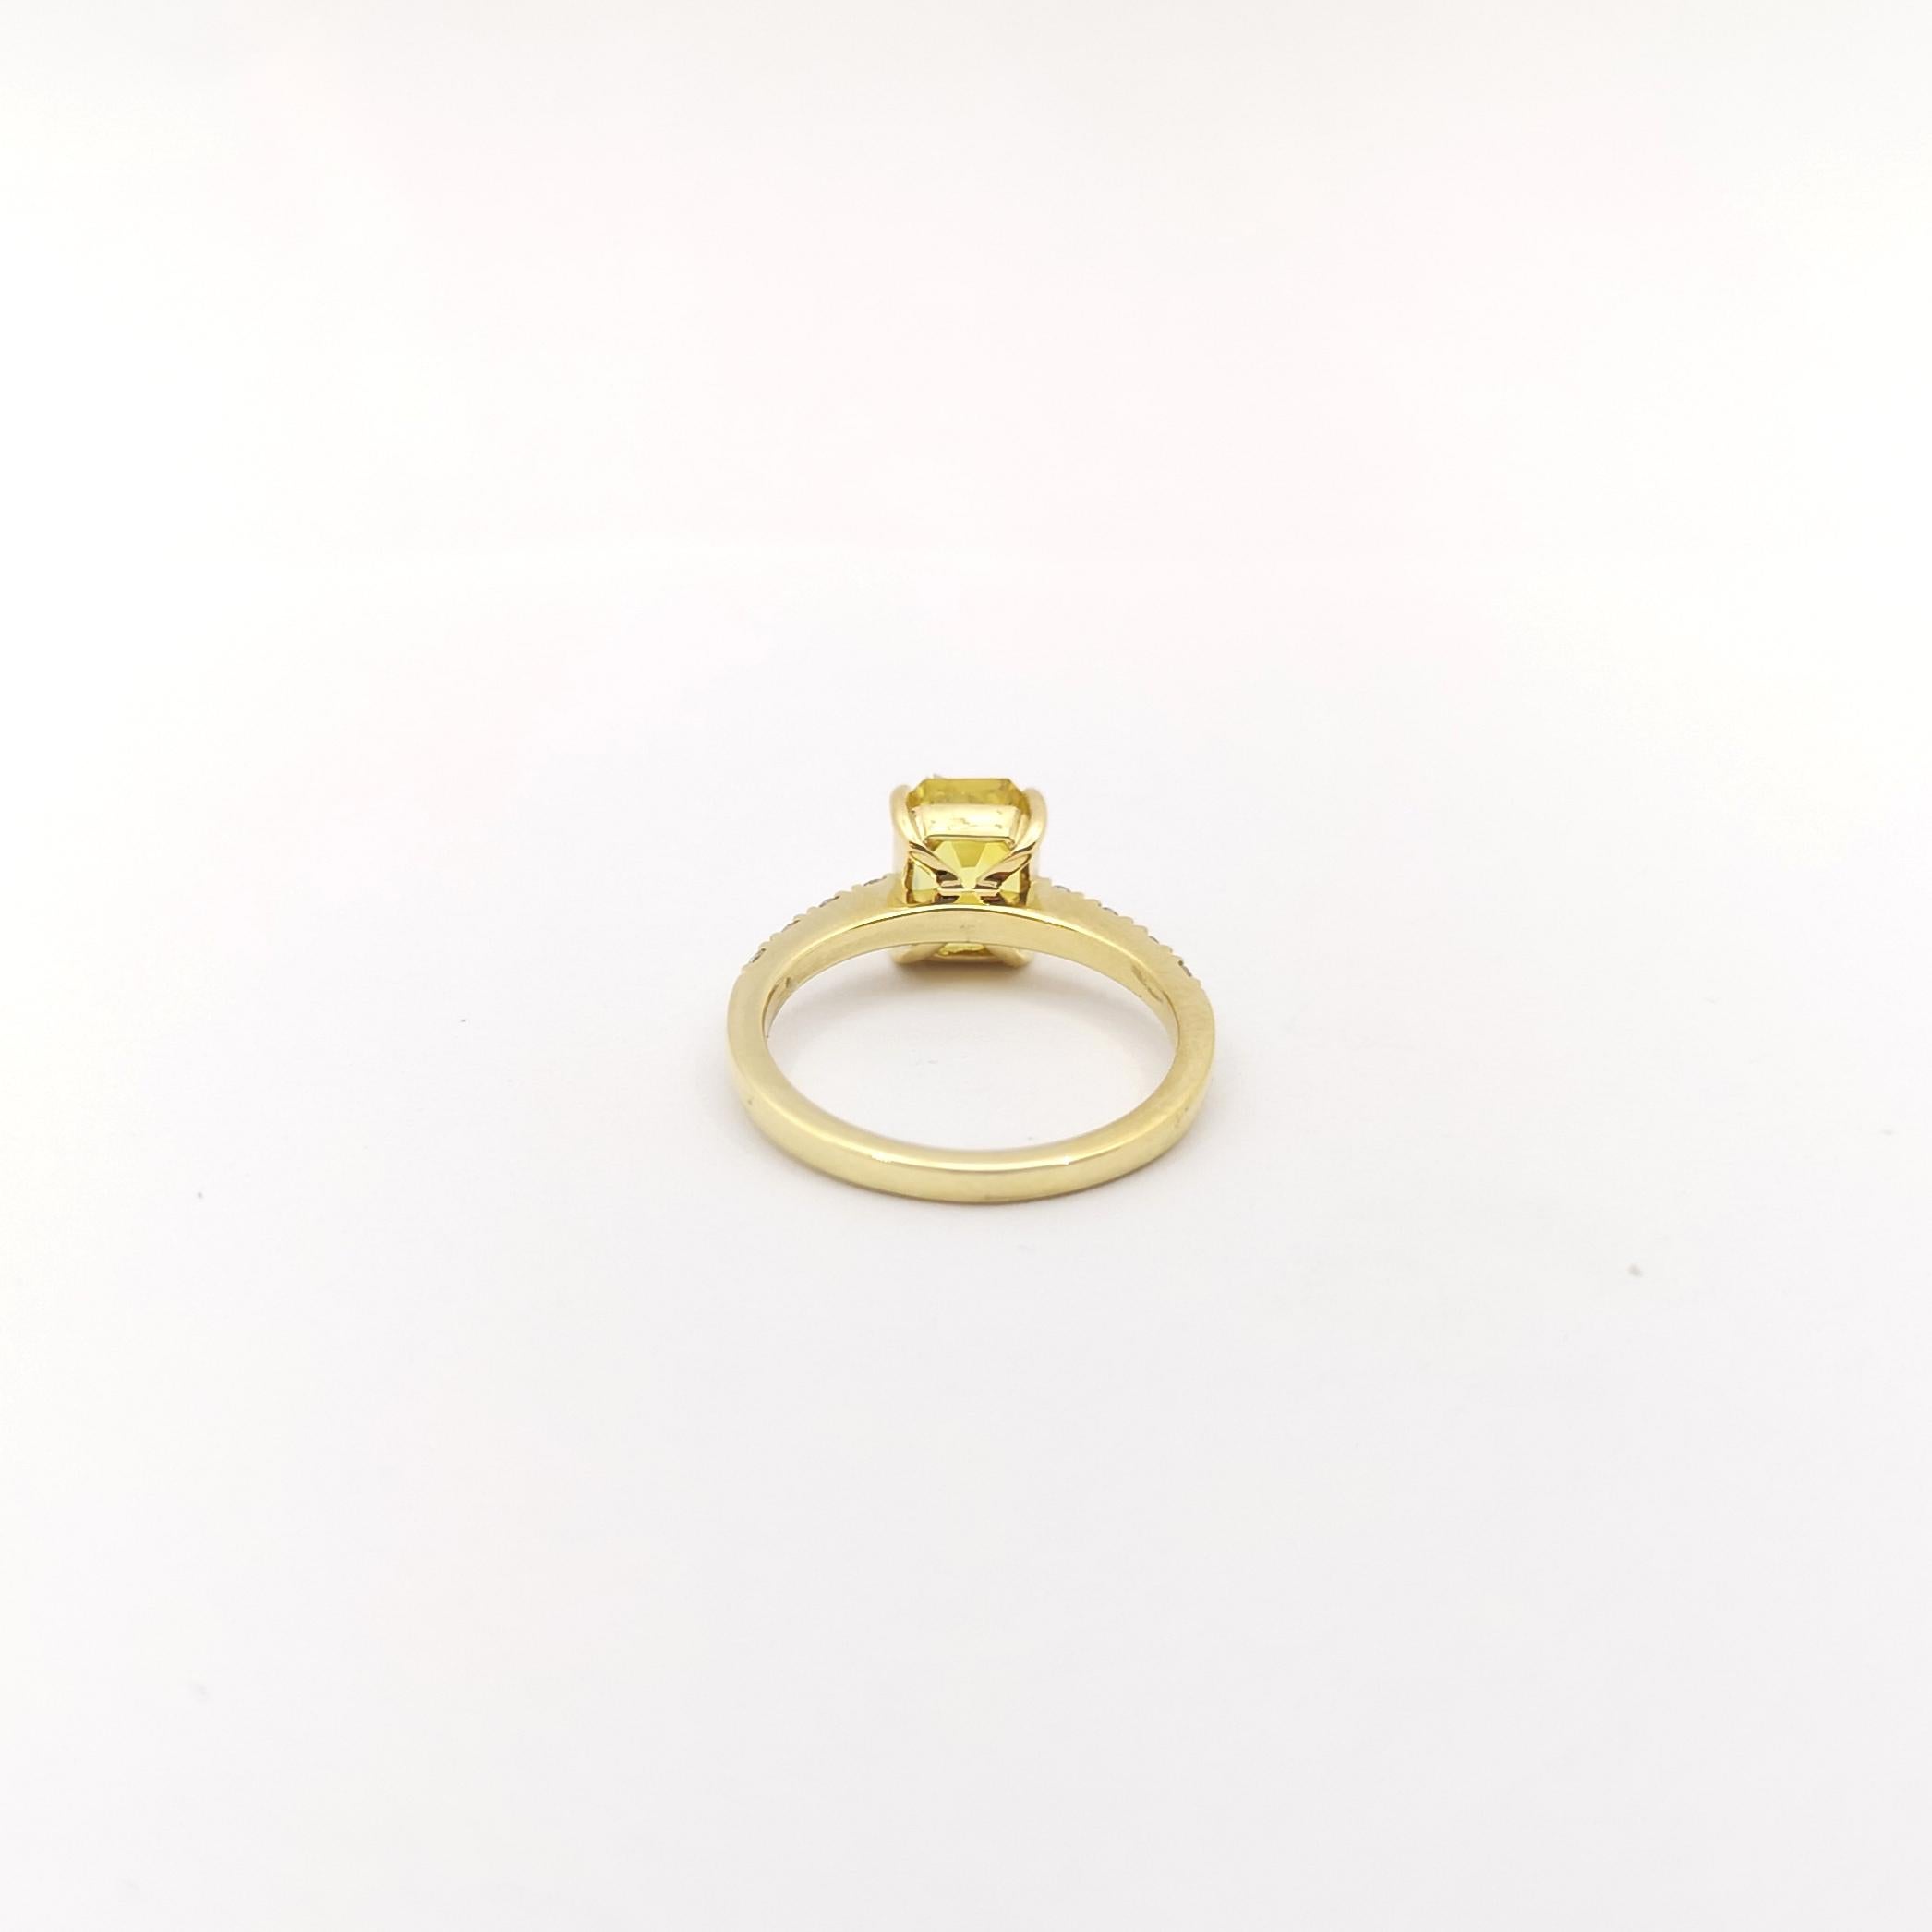 Yellow Sapphire with Diamond Ring set in 18K Gold Setting For Sale 3